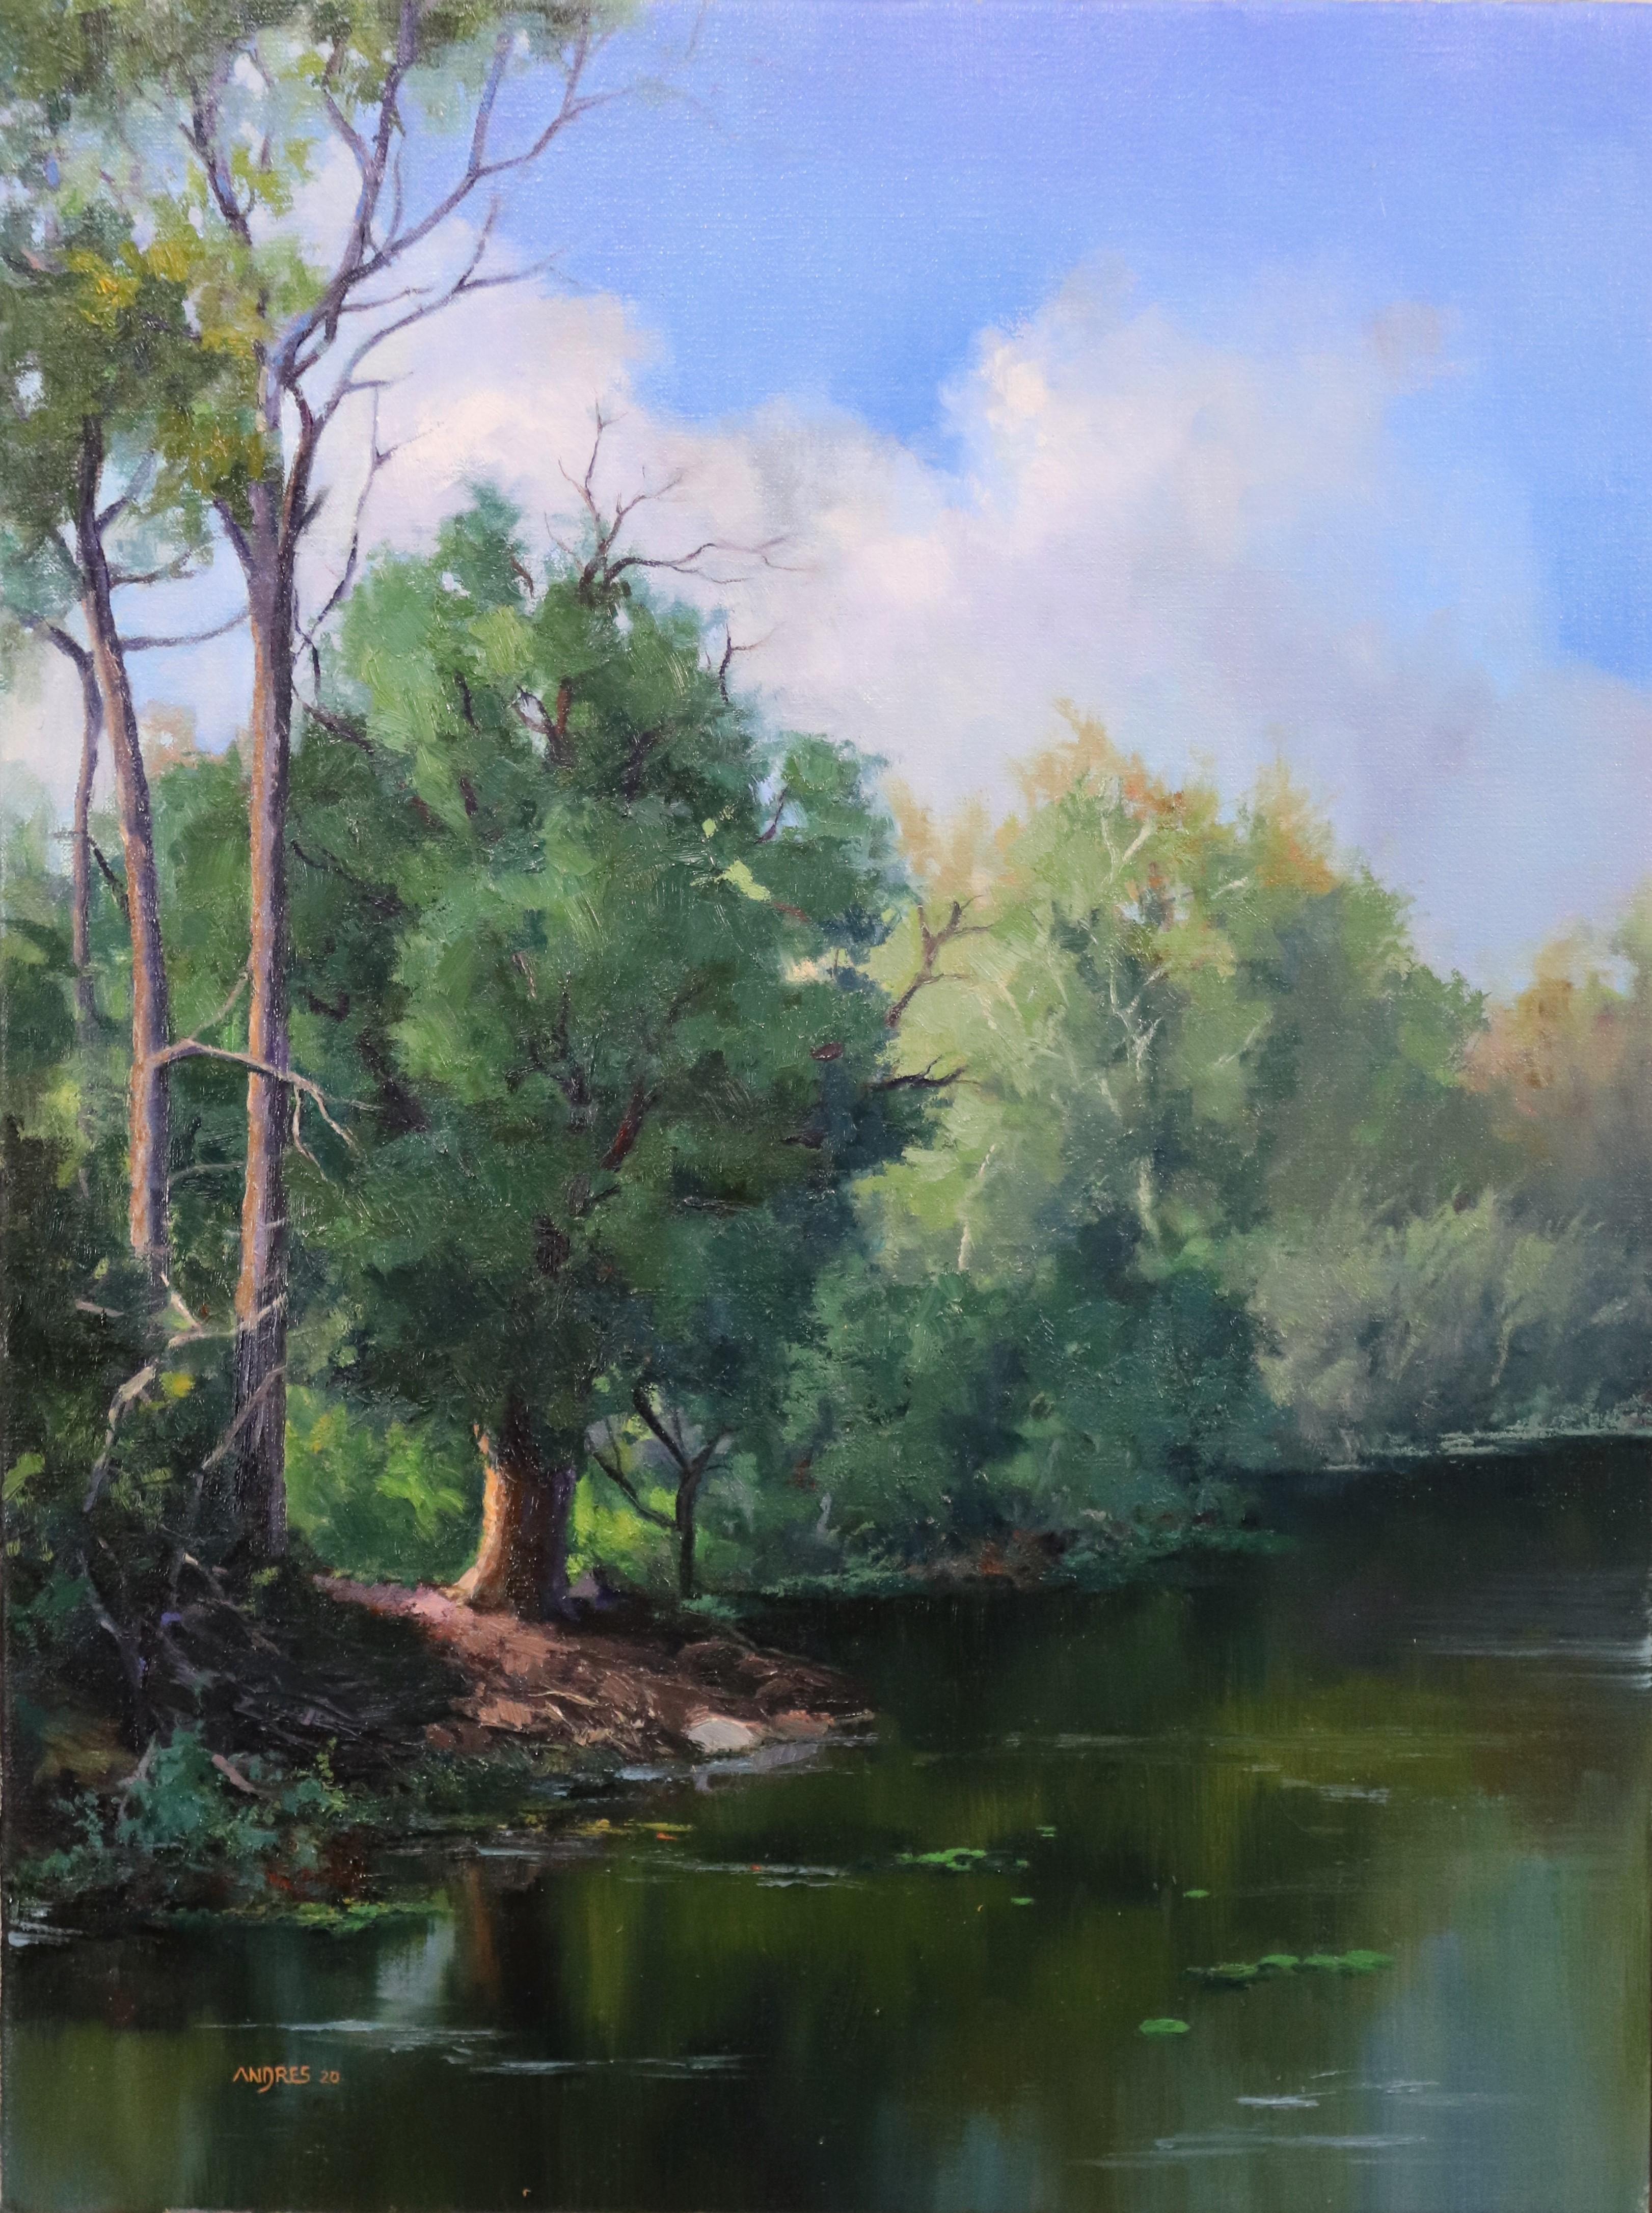 Andres Lopez Landscape Painting - Afternoon by the Riverside, Oil Painting